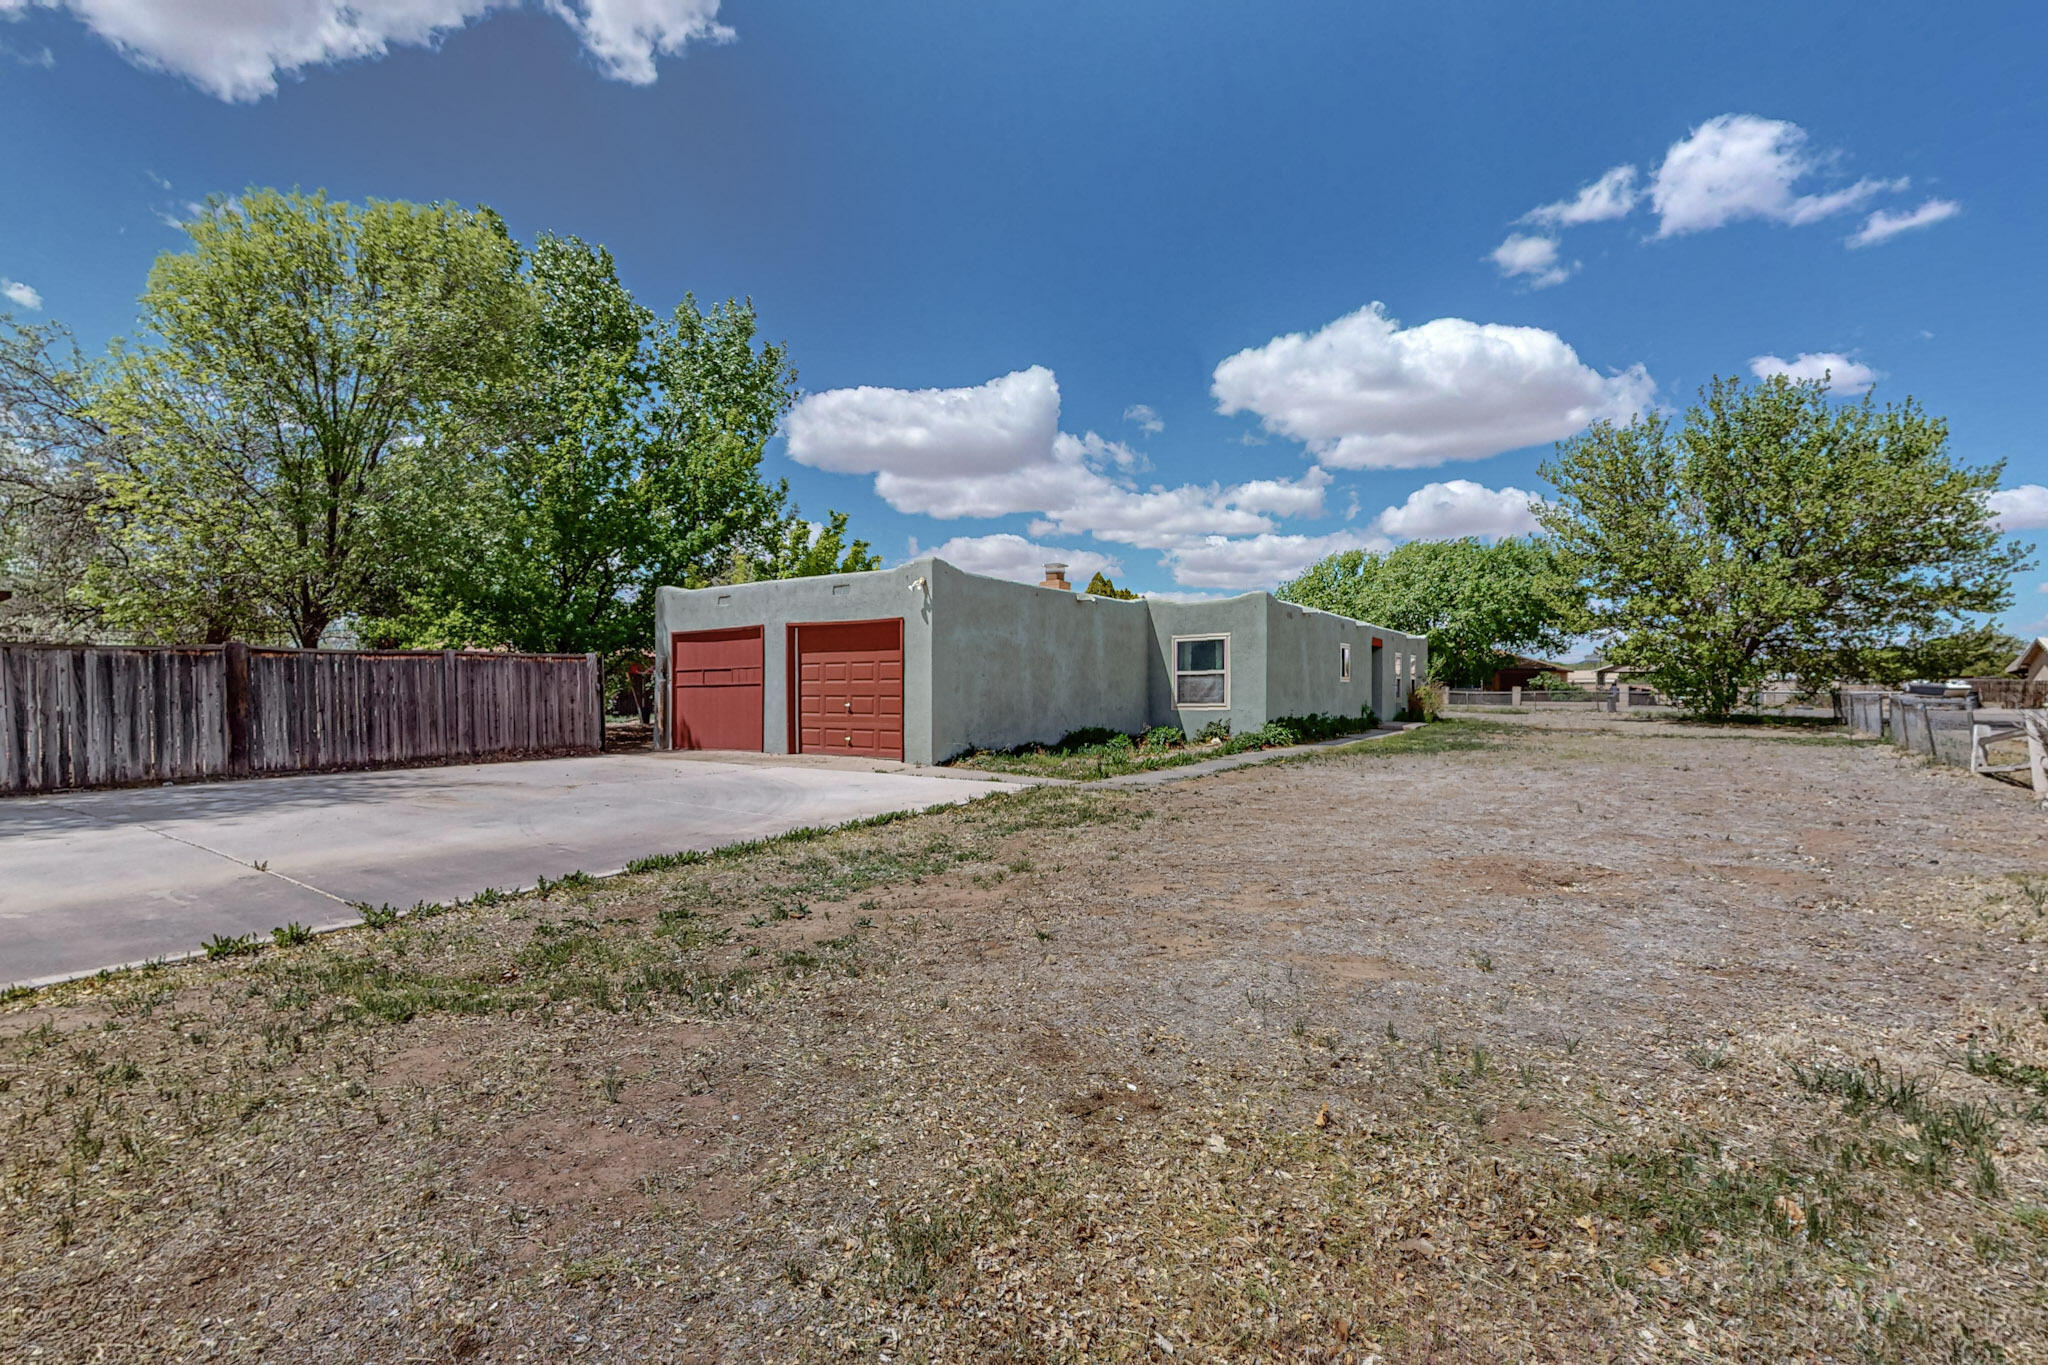 This New Listing is a Absolute Hidden Gem! Nestled in a Quiet Neighborhood in Los Lunas, while still close to Shopping and Restaurants, this home is Featuring Fabulous Fruit Trees on Over a Half Acre of Land, a Bonus Two Car Garage, Additional Storage Sheds and Lots of Space for Privacy and Entertainment! It also has a Private Well, an Irrigation Well and Septic Tank. Inside you will find a Custom Wood-Burning Fireplace, a Spacious Living Area, Walk-In Closet in the Main Bedroom and a Kitchen bosting Lots of Cabinet Space with an Oven that doubles as an Air Fryer for all your Culinary Adventures. This Property has Tons of Potential and Opportunity to Make it Your Own! Do Not hesitate, Schedule Your Showing Today!